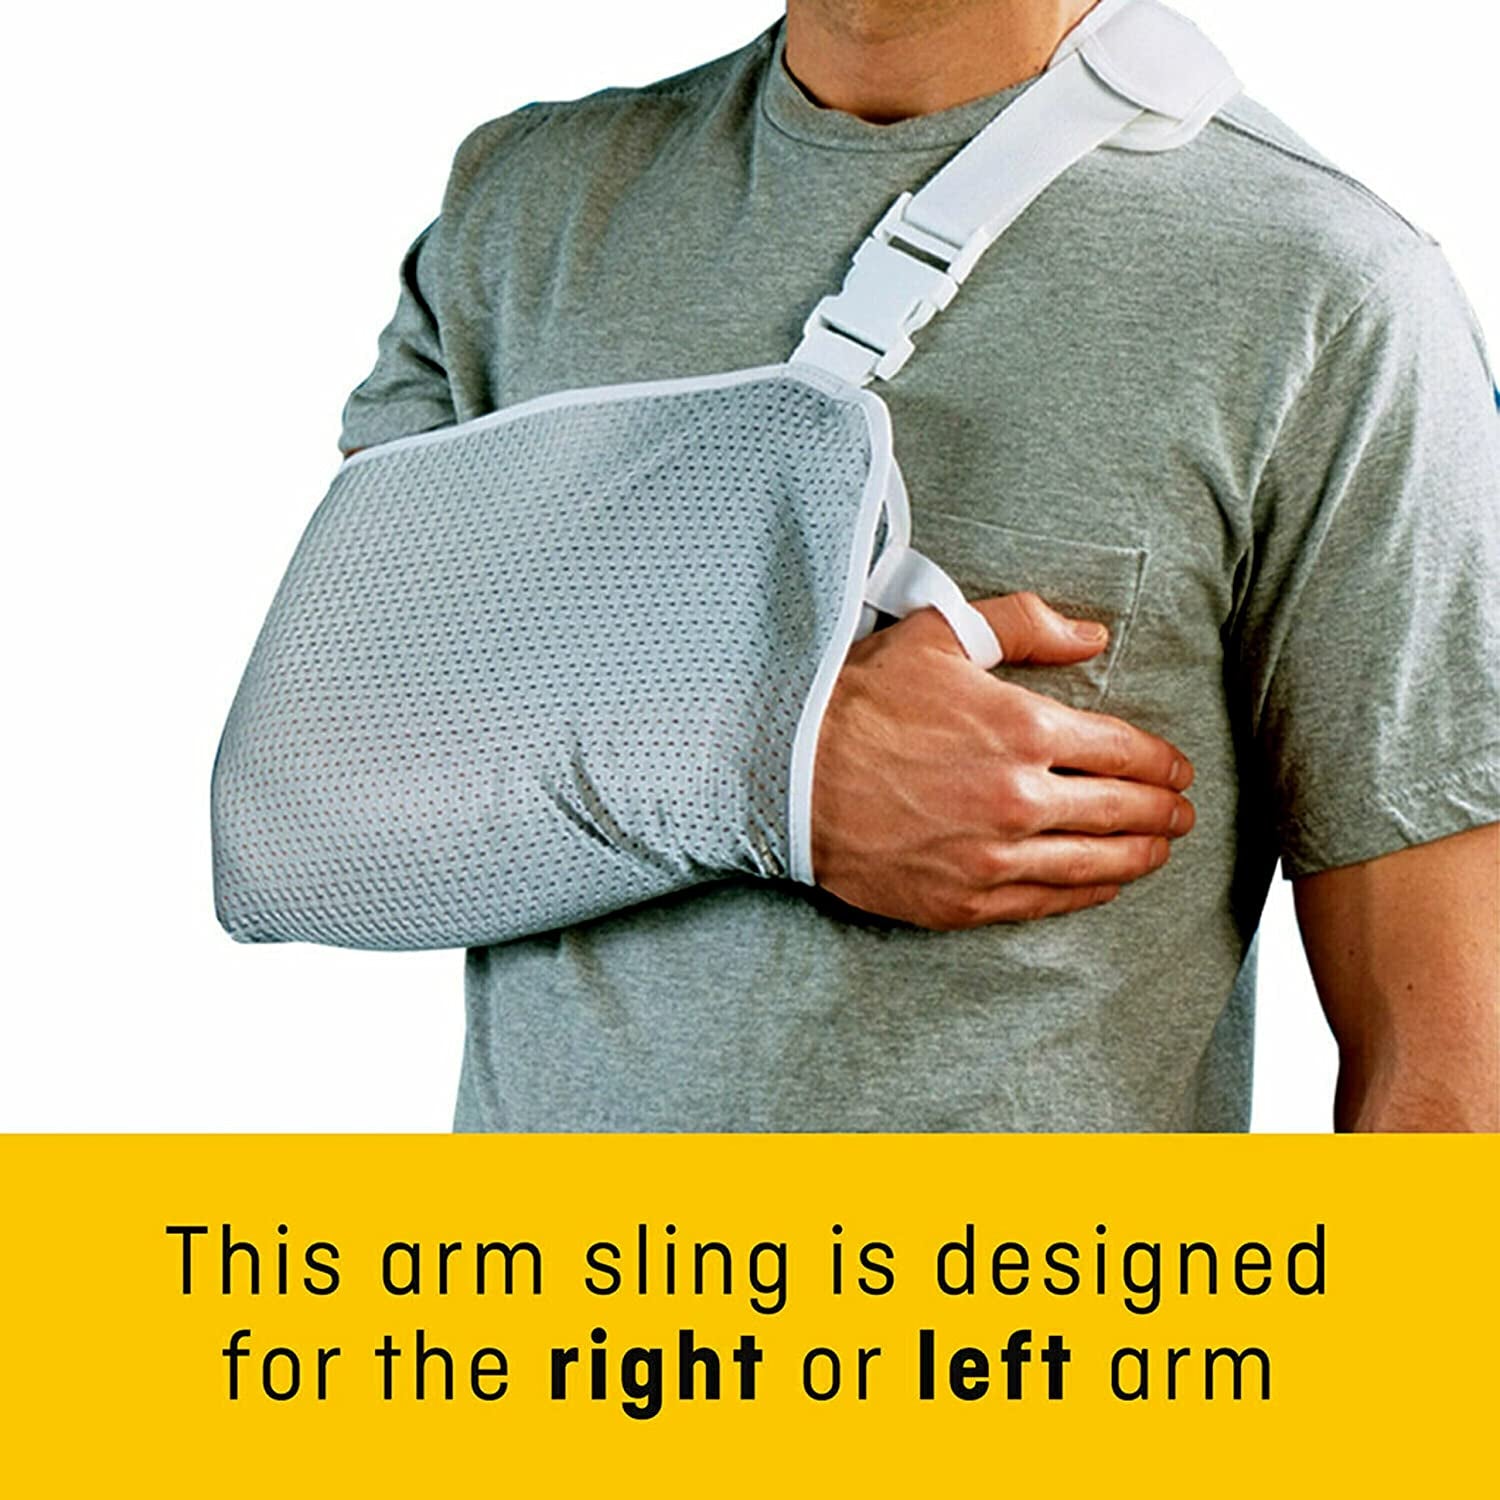 FUTURO Arm Sling, Ideal for Recuperation from a Broken Bone, Sprain, and Surgery, One Size